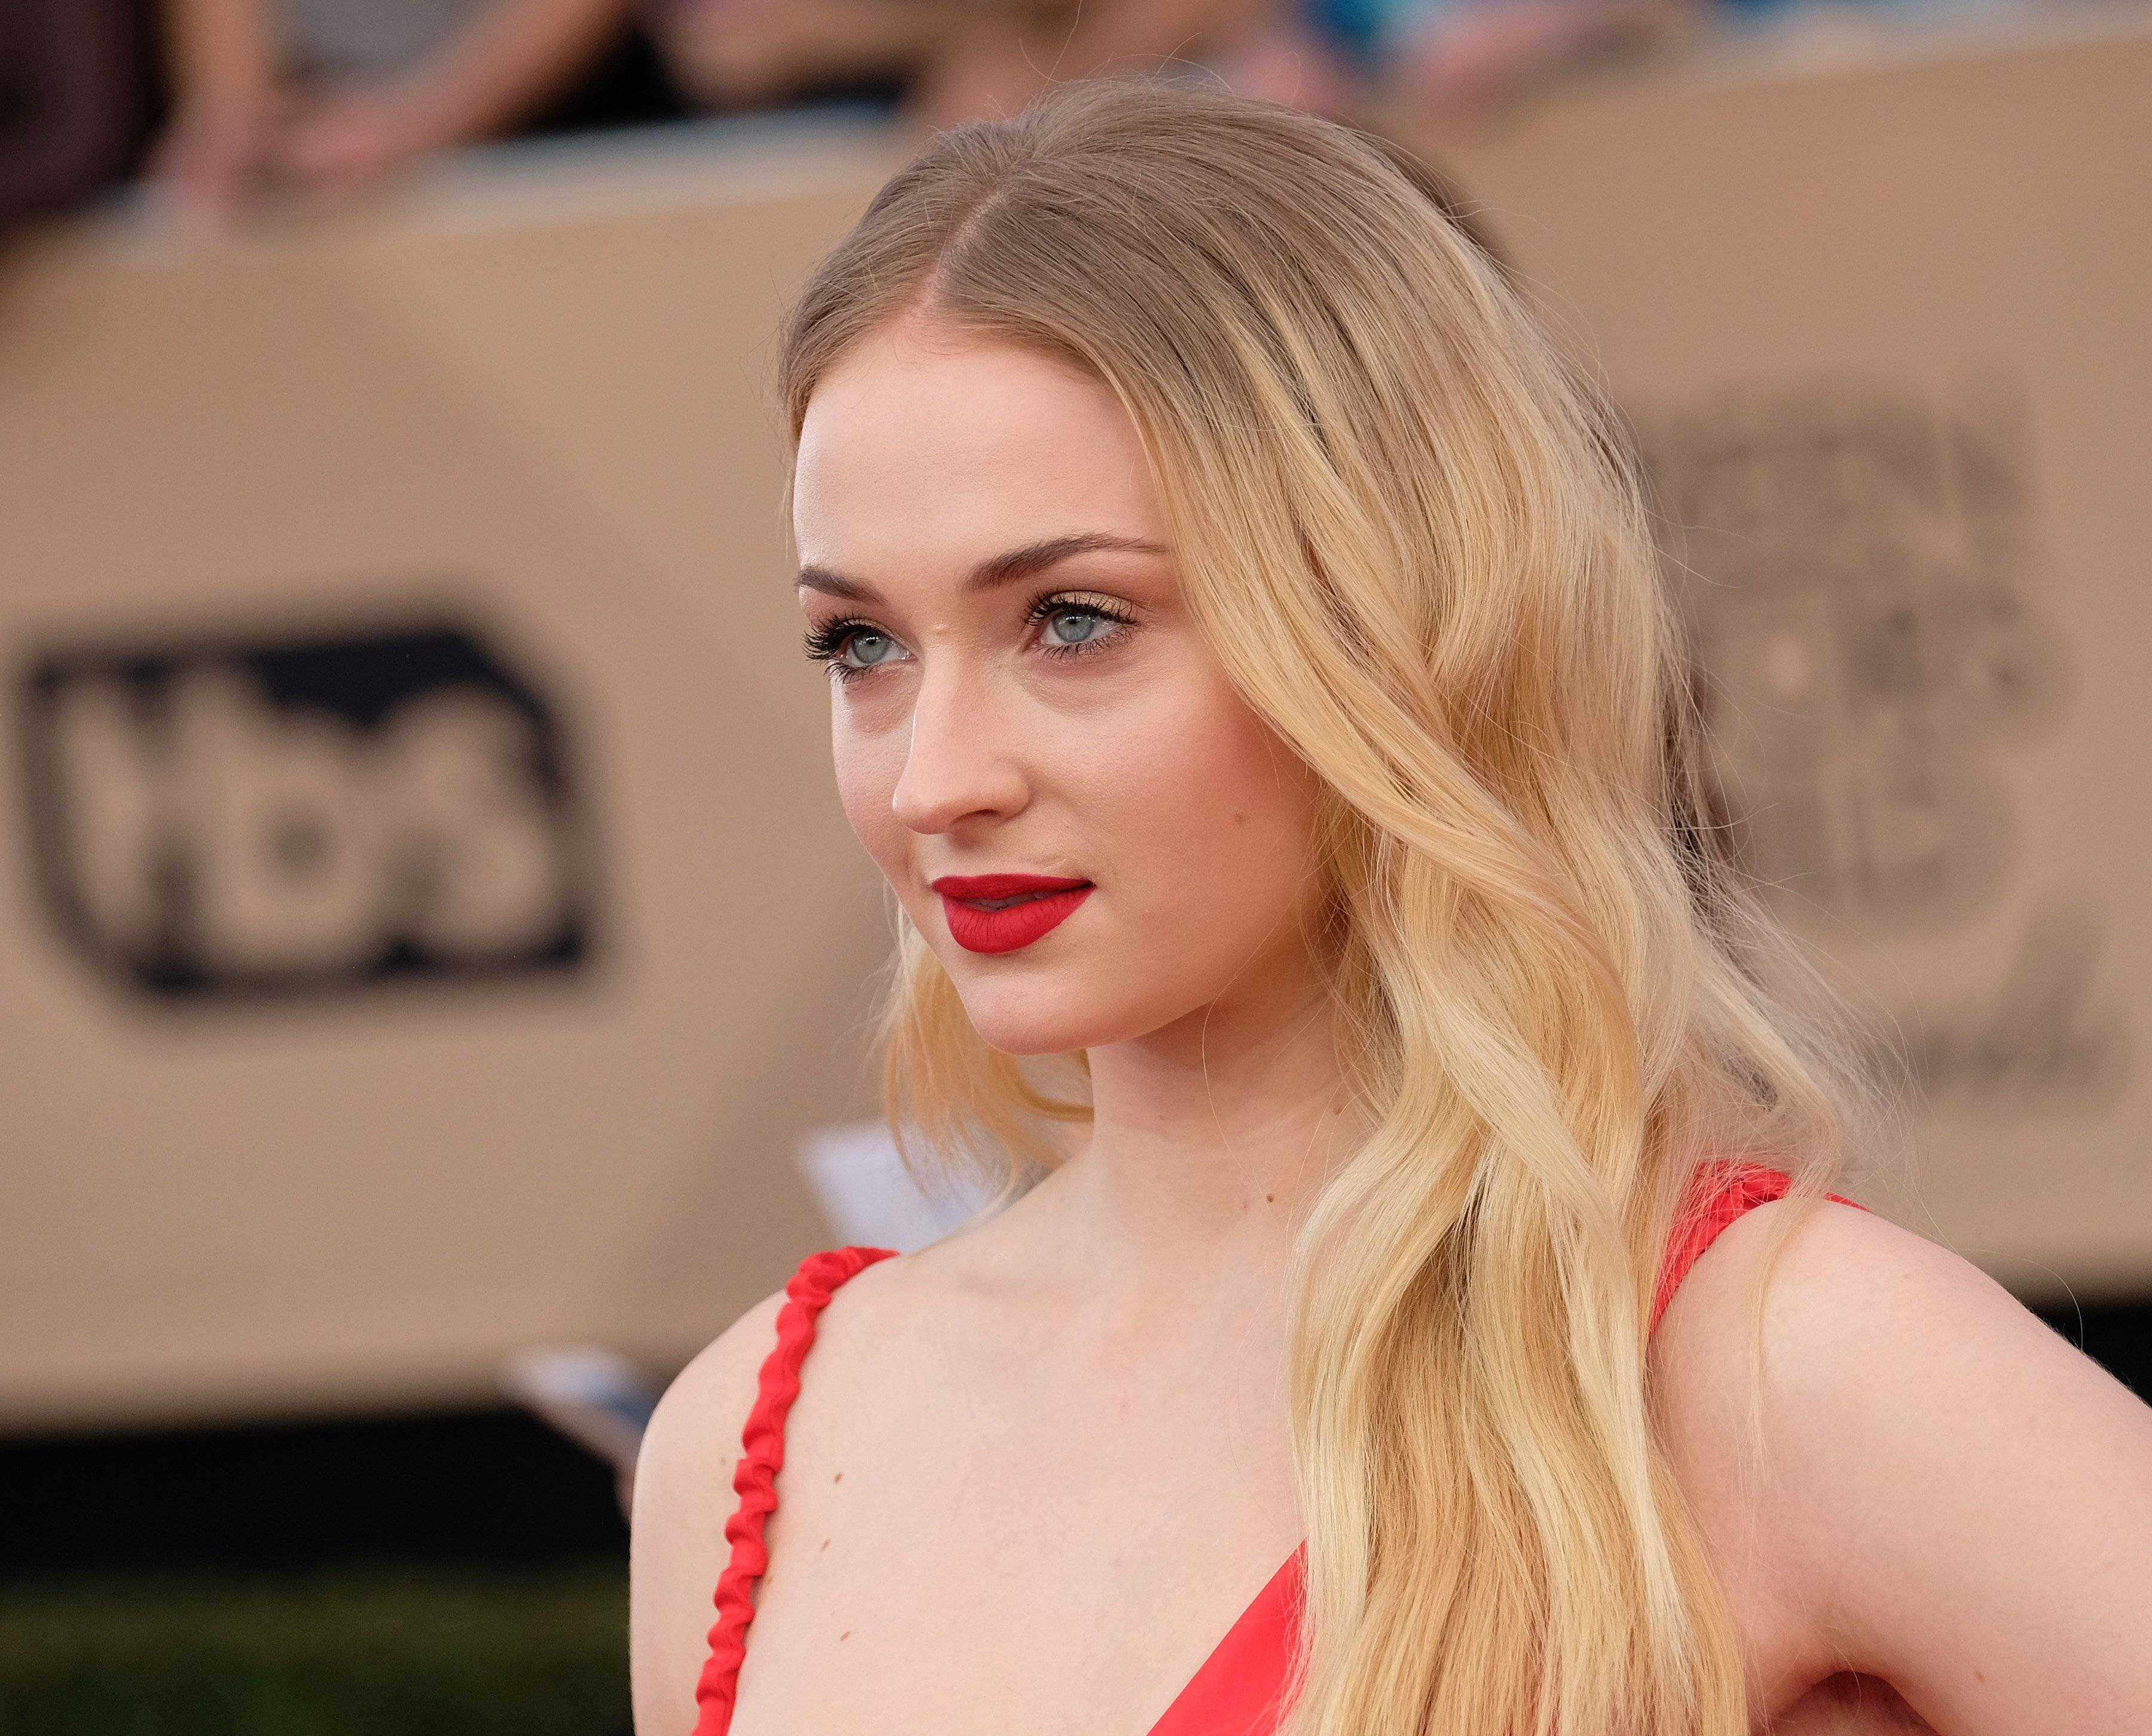 Sophie Turner – 23rd Annual Screen Actors Guild Awards In Los Angeles, CA January 29, 2017